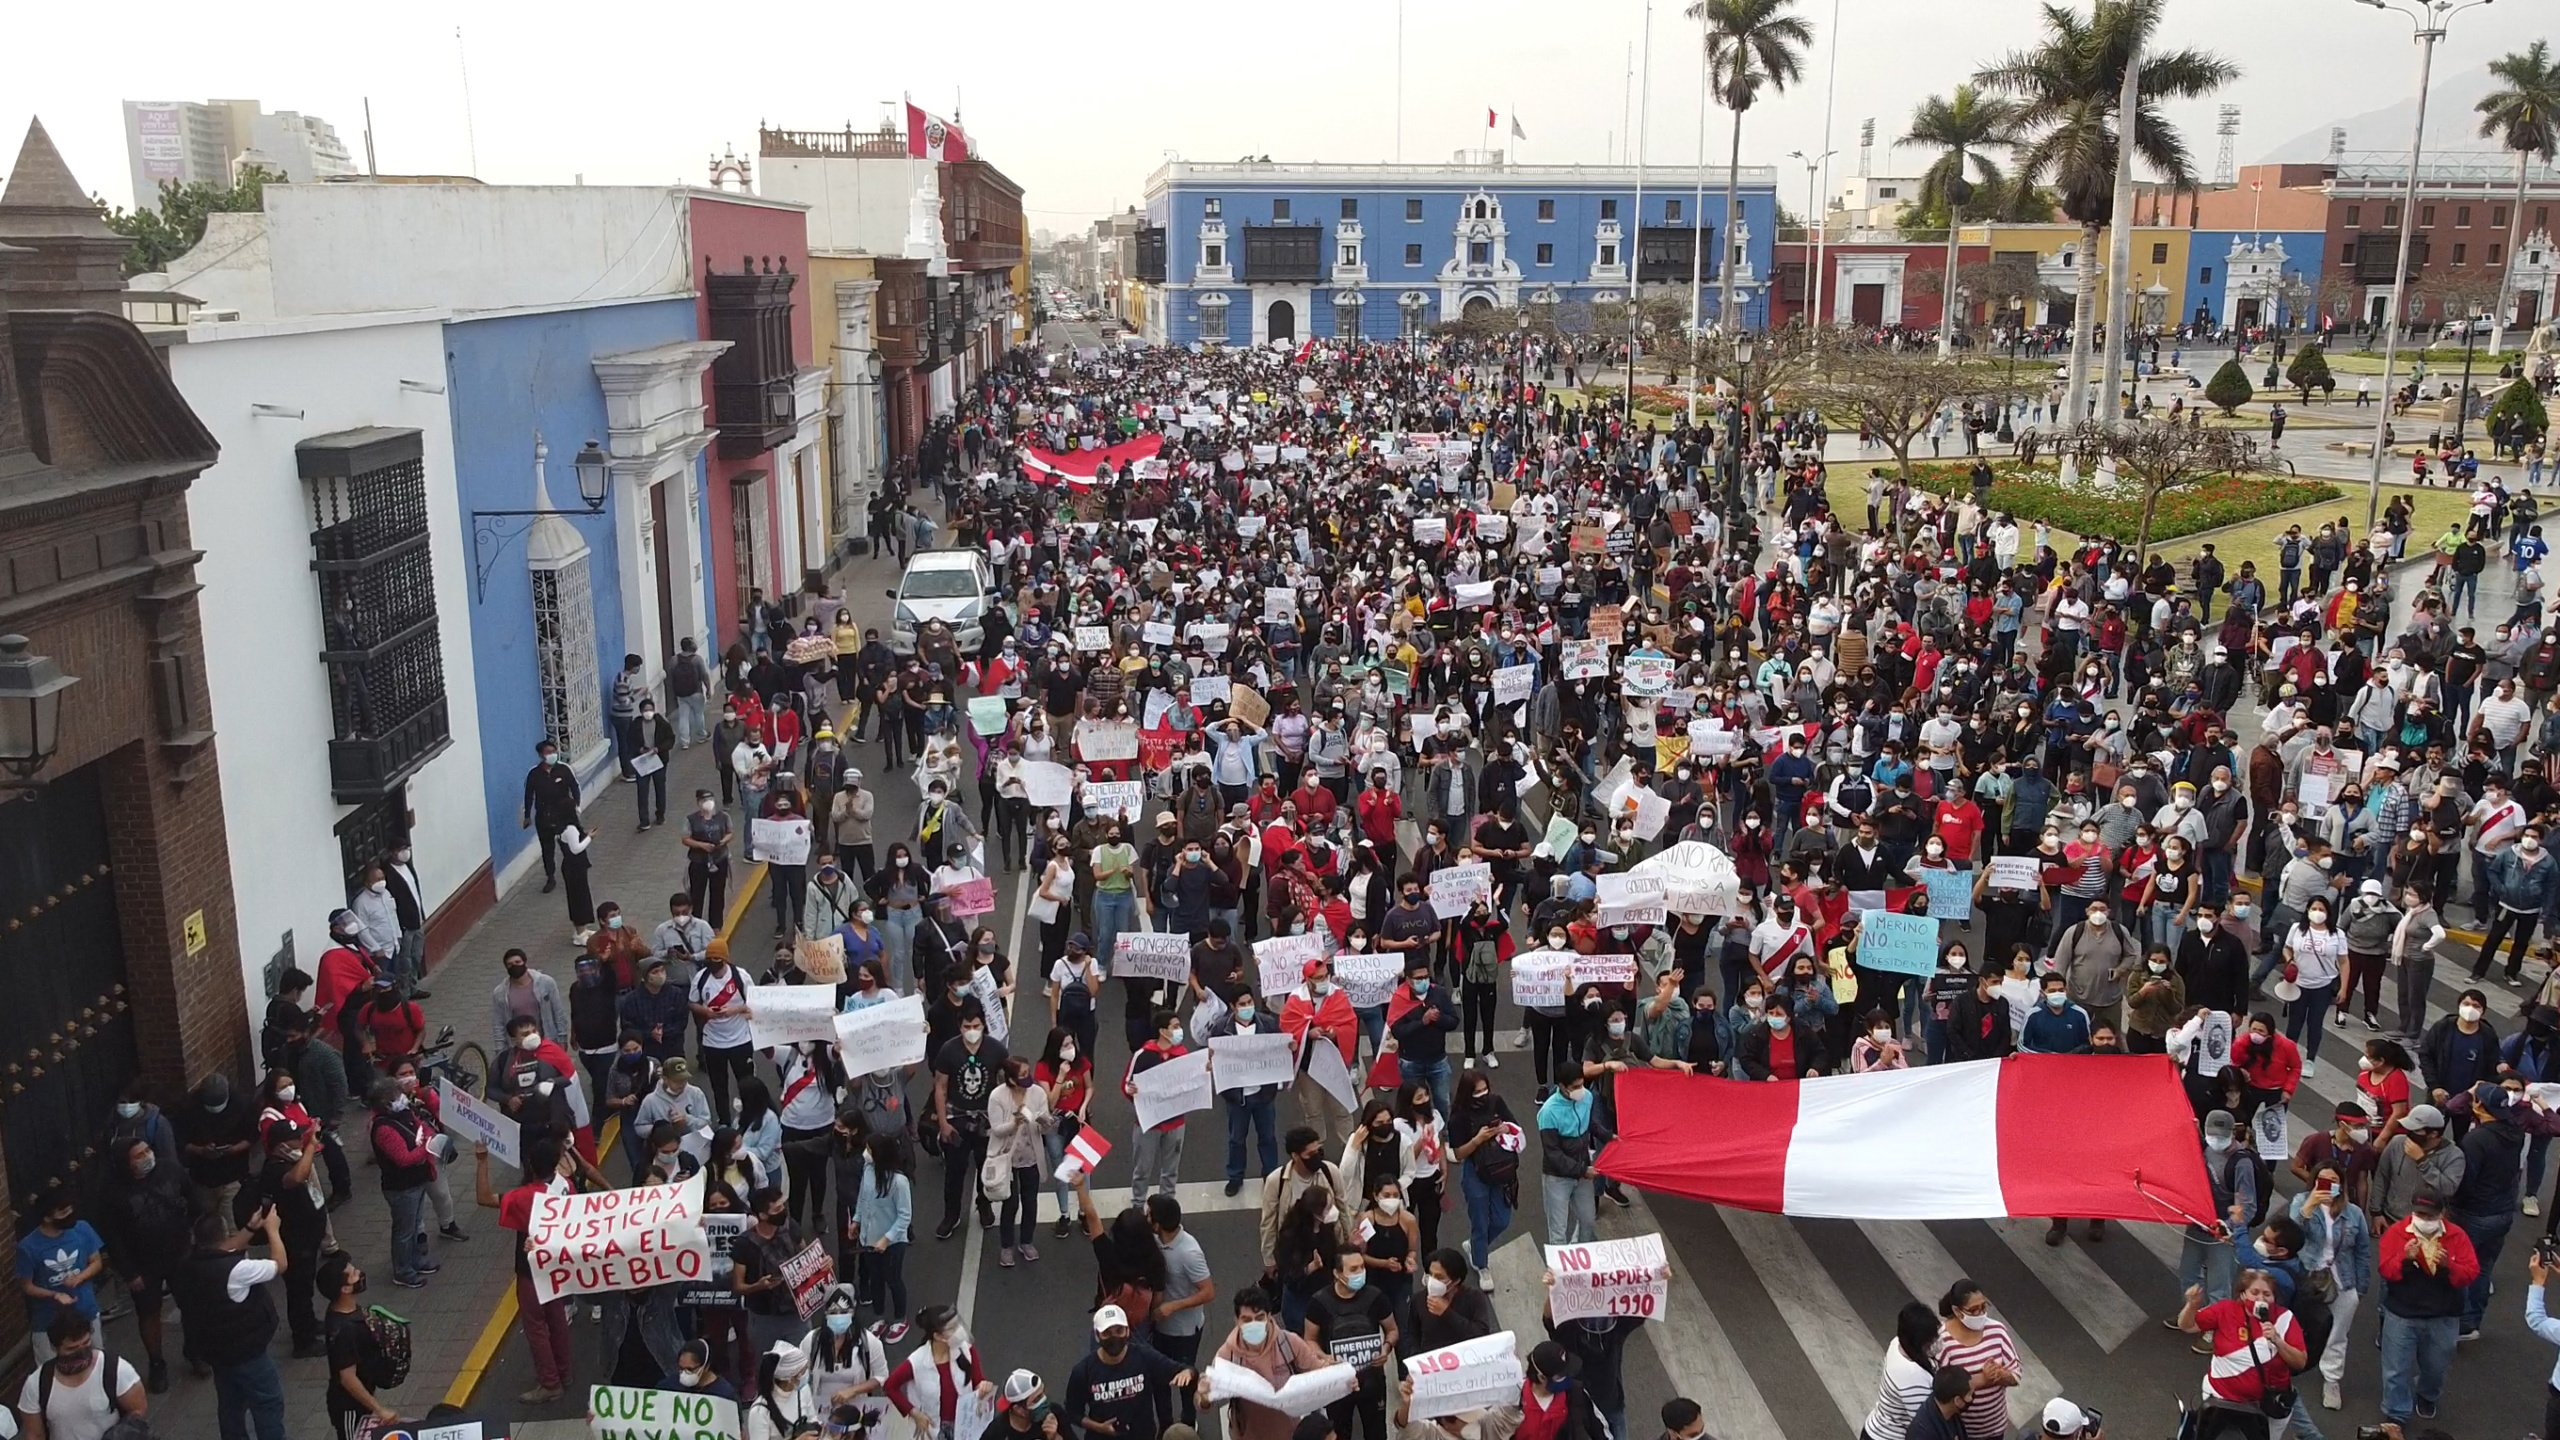 The protests in Peru will go on: for the next few days, activist groups and grassroots organizations have announced new meeting points. Photo: André Casana Rodríguez / @dre.mov